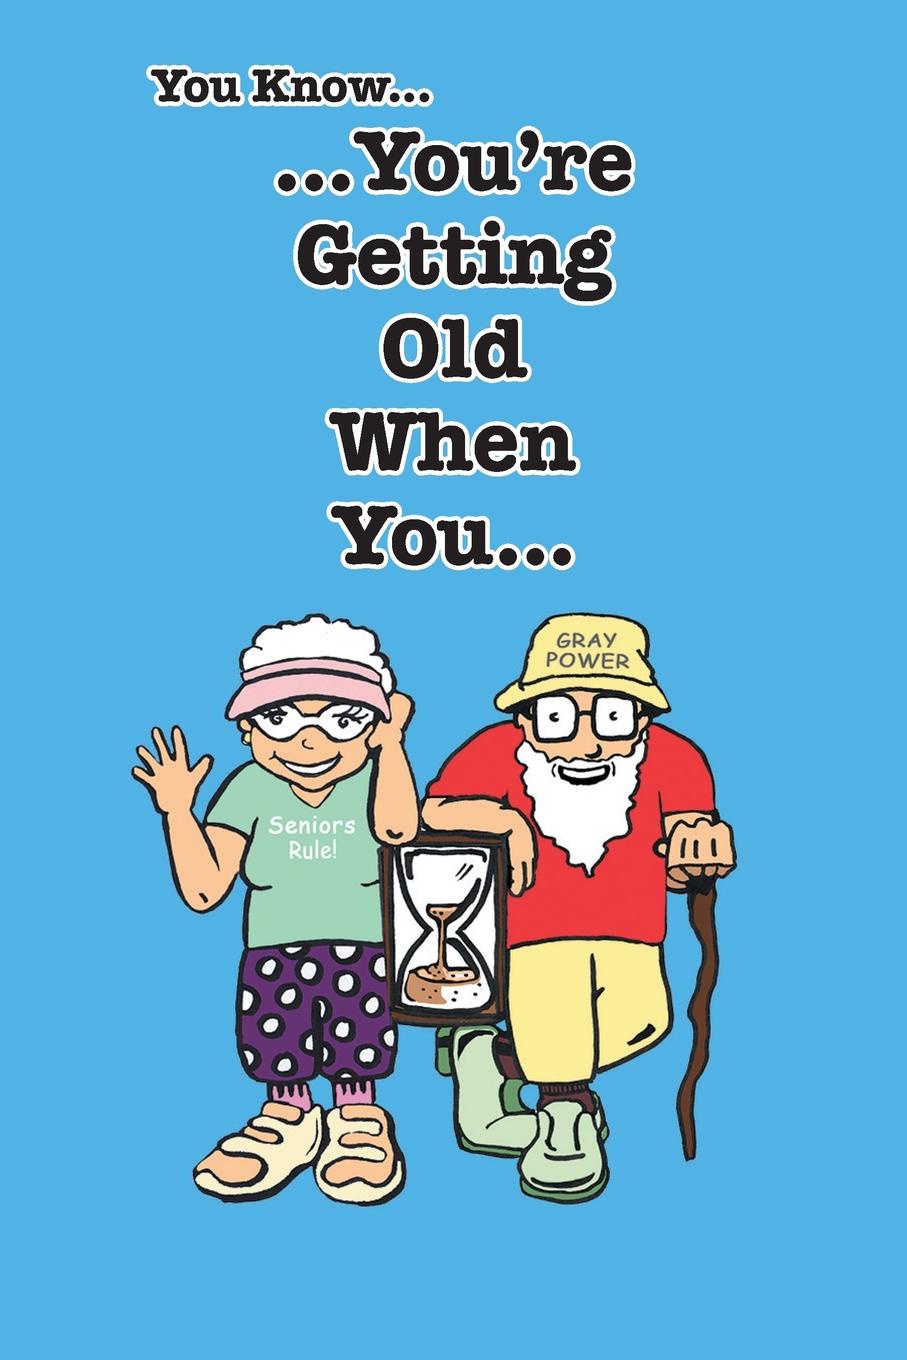 When we get older. You are getting old. Getting old.